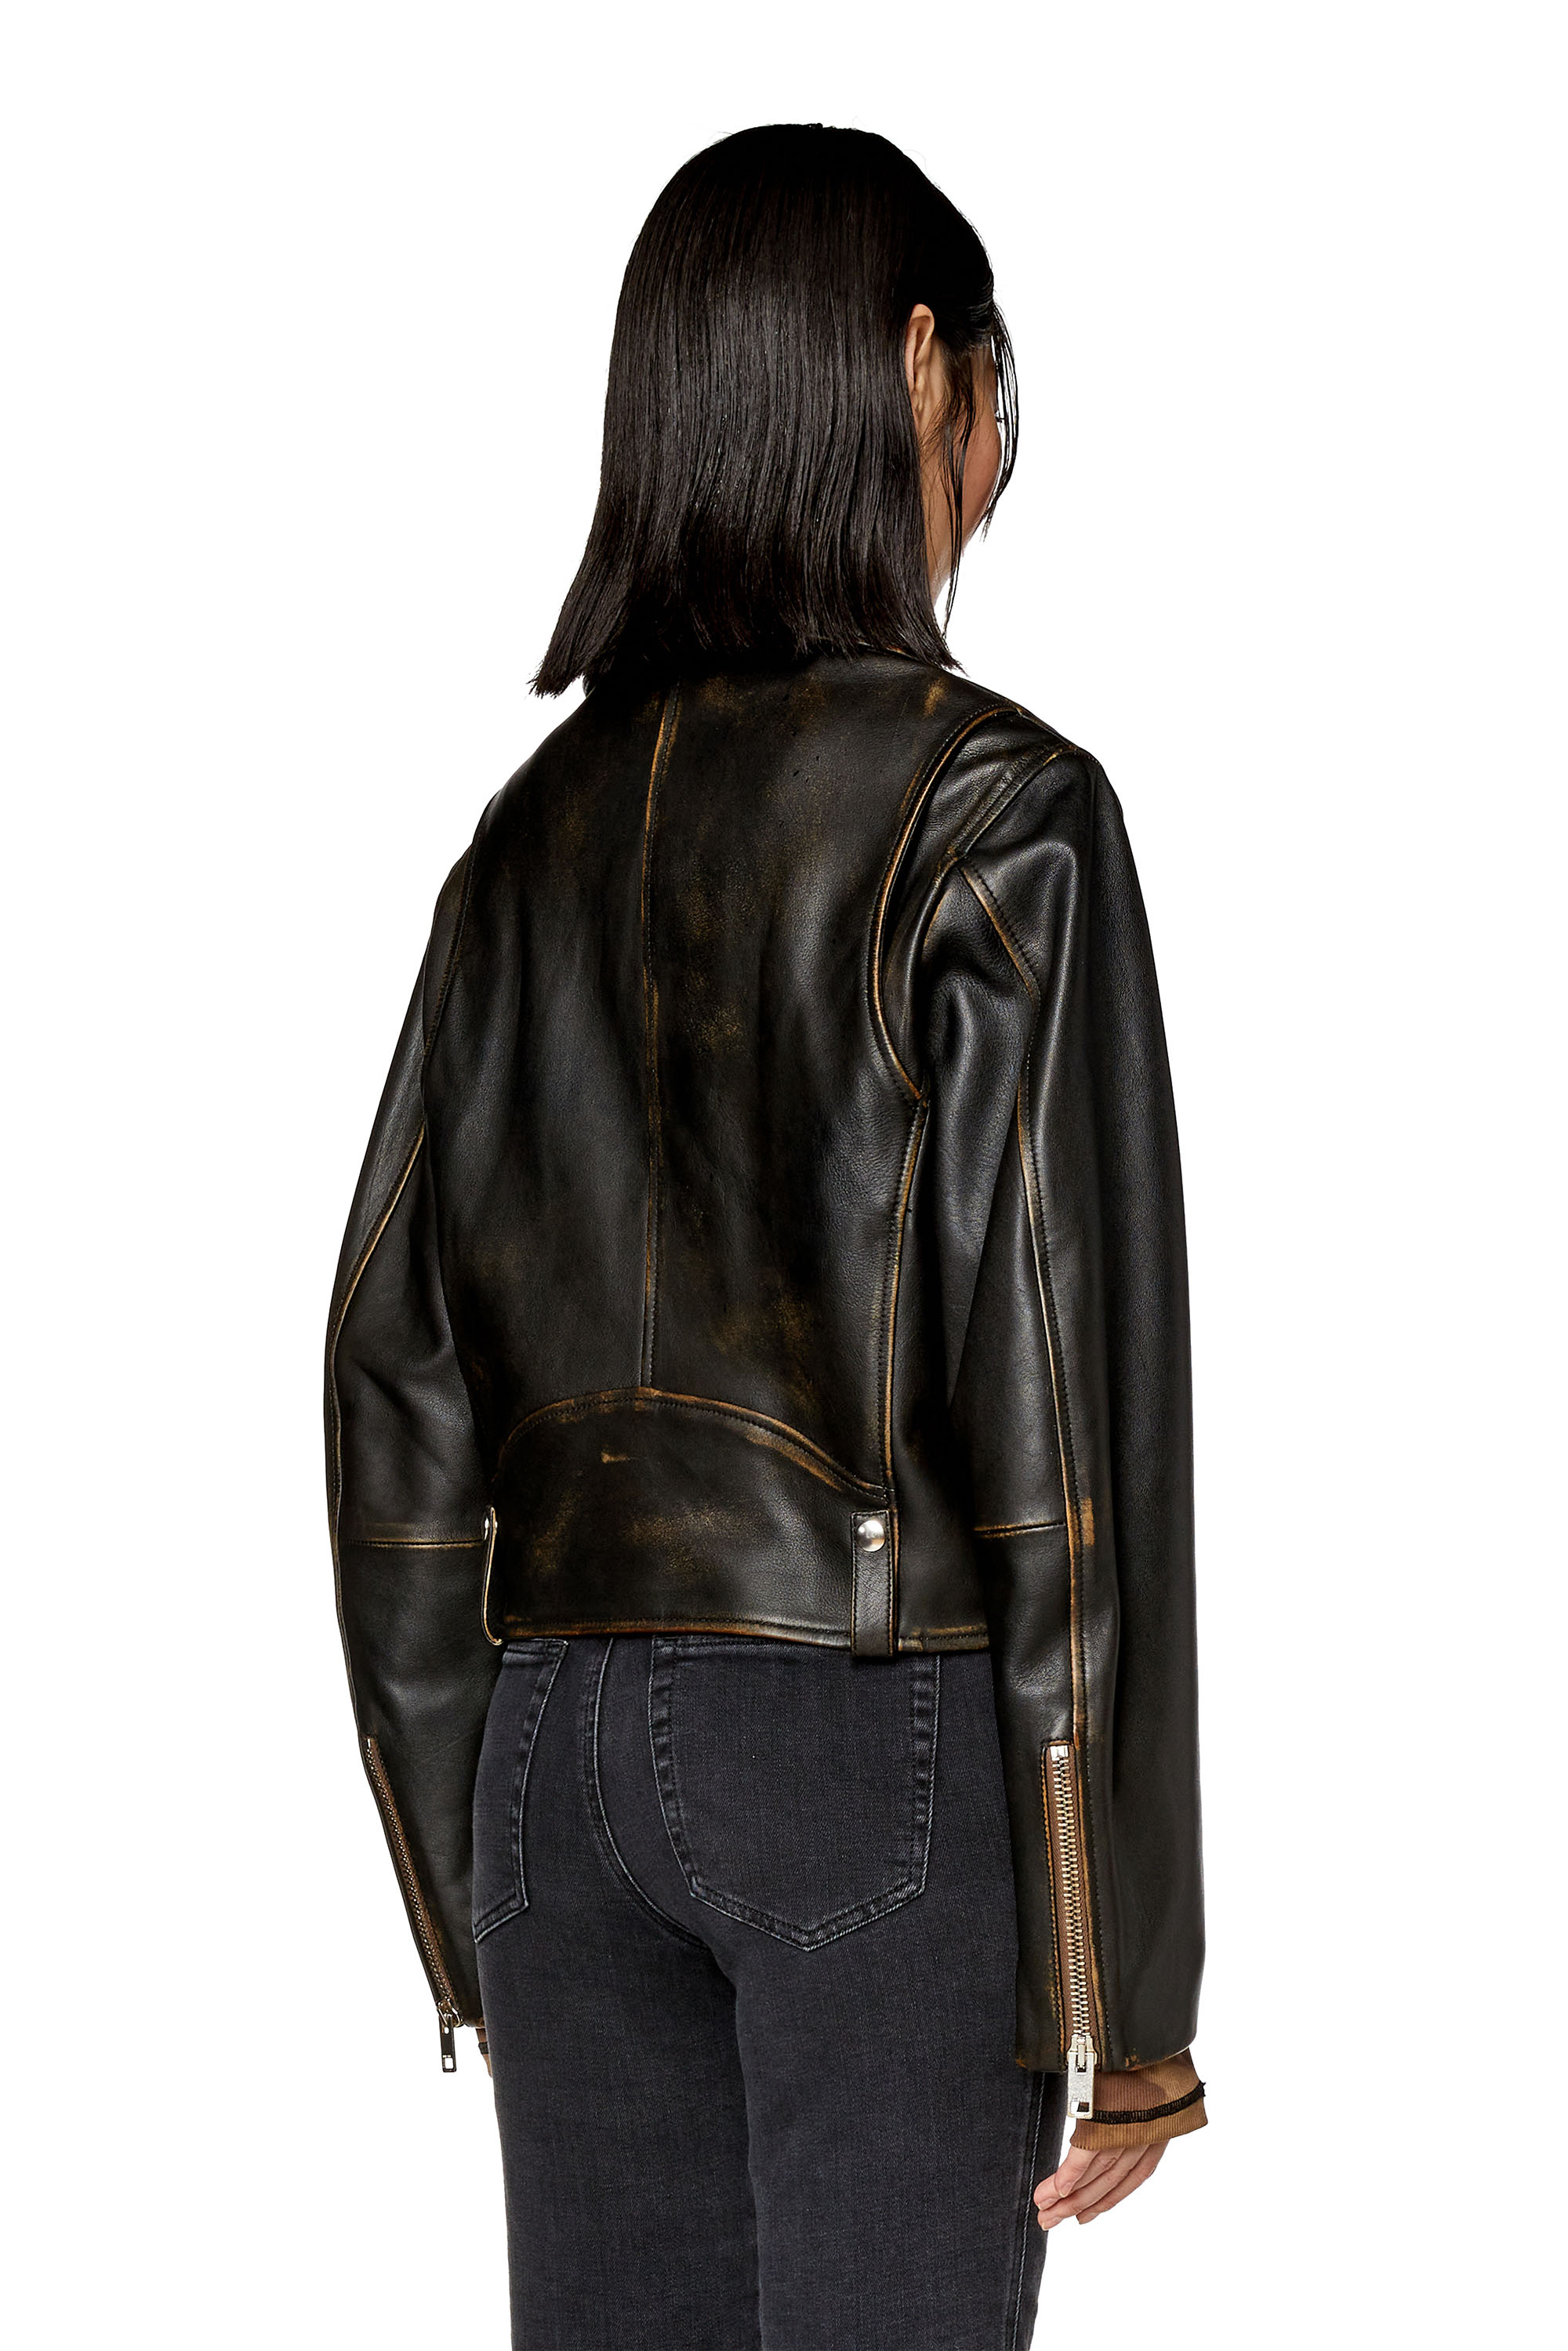 Women's Black Leather Jacket With Gold Plated Zip & Button, Lambskin  Jacket, Gift for Women, Woman Leather Jacket,biker Jacket,gift for Her 